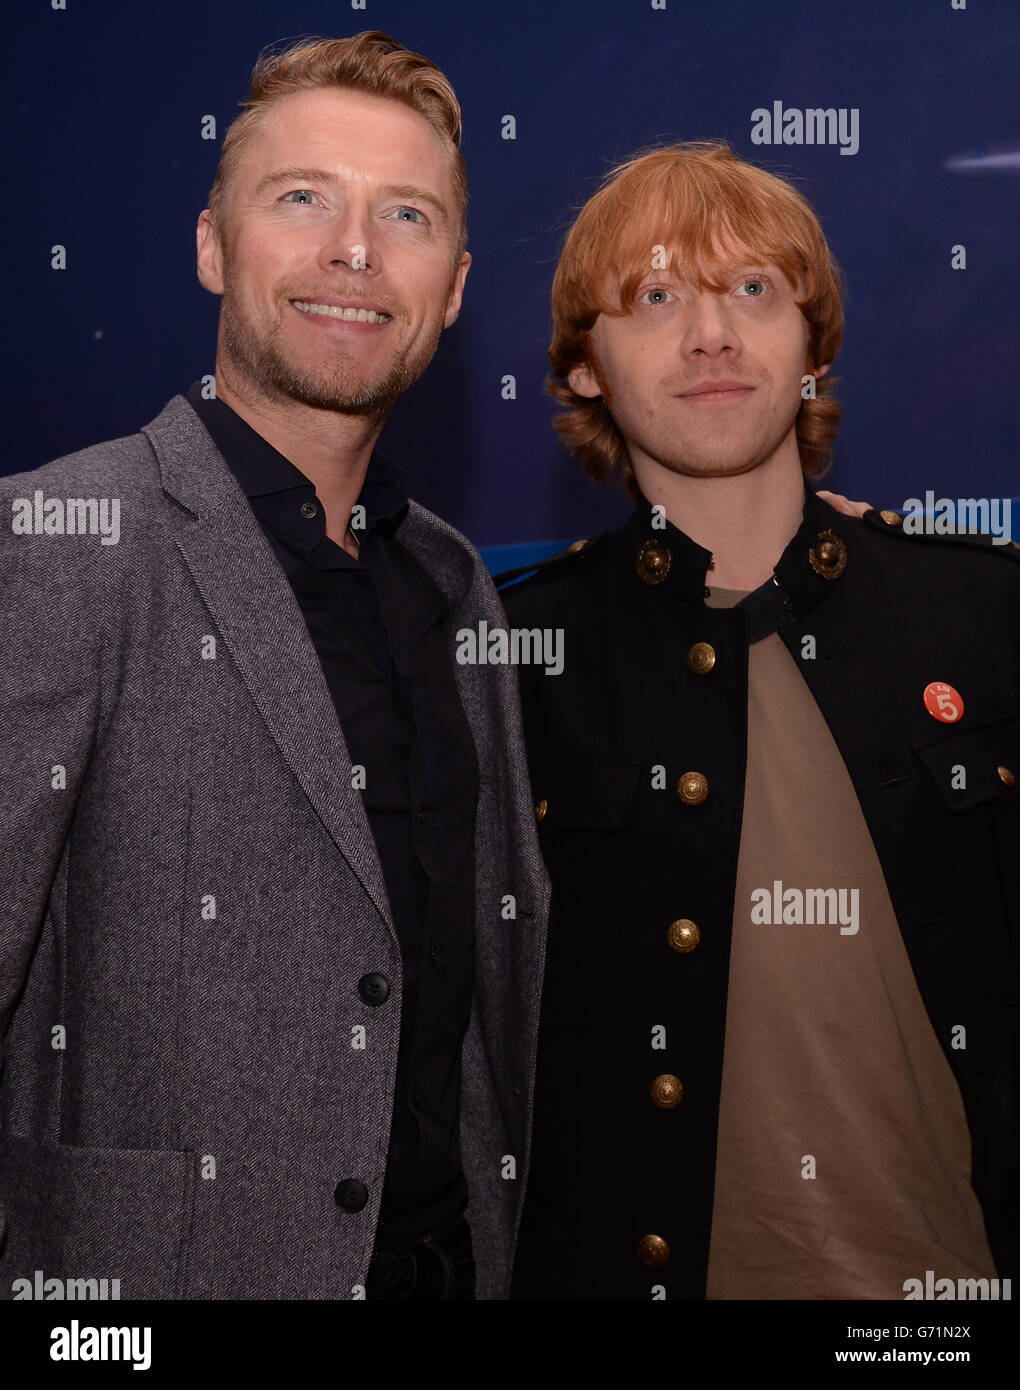 Ronan Keating and Rupert Grint arrive for the premiere of Postman Pat: The Movie at the Odeon, West End, London. Stock Photo